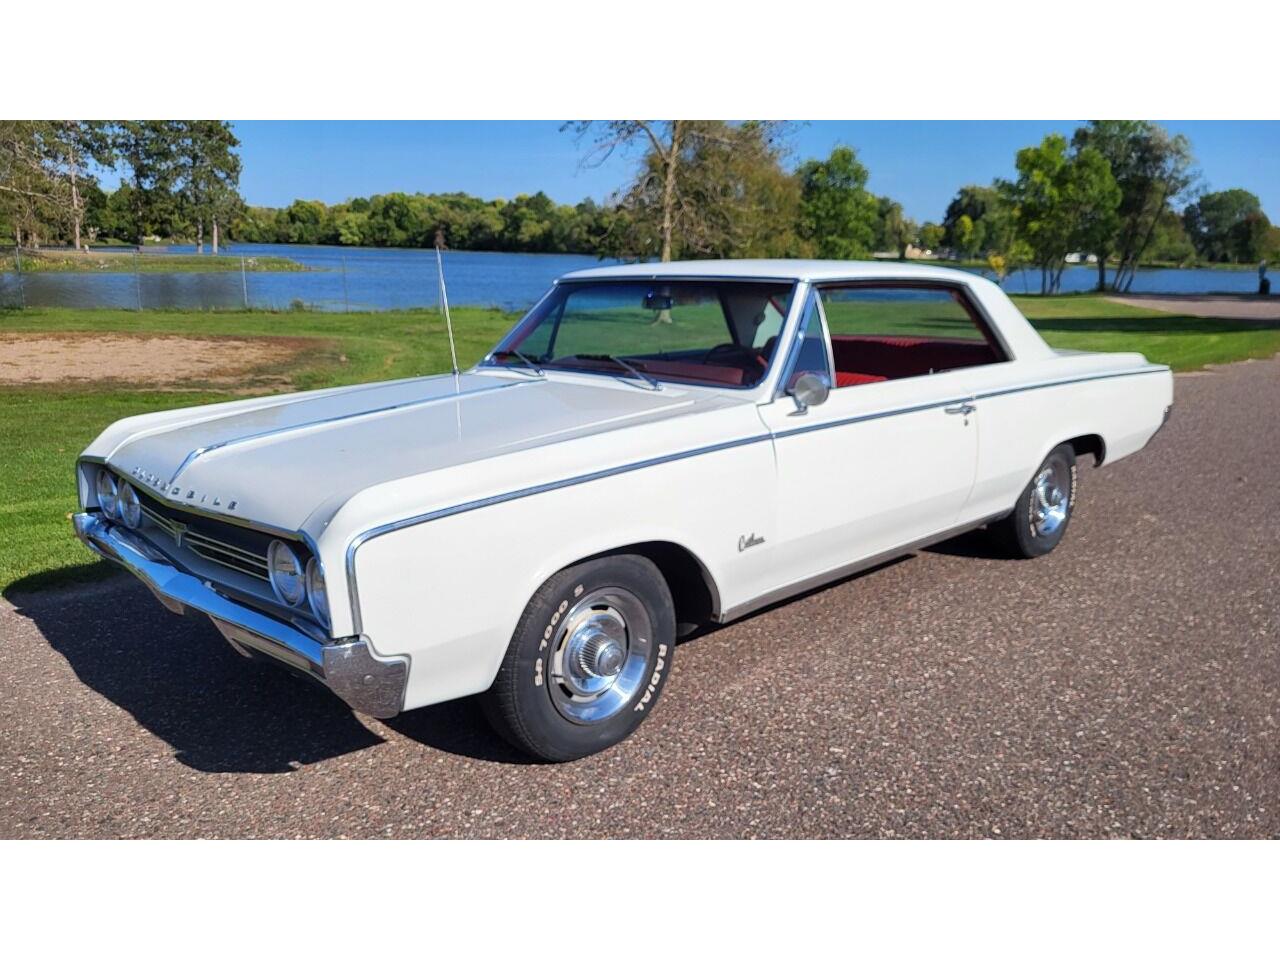 For Sale: 1964 Oldsmobile Cutlass in Stanley, Wisconsin for sale in Stanley, WI